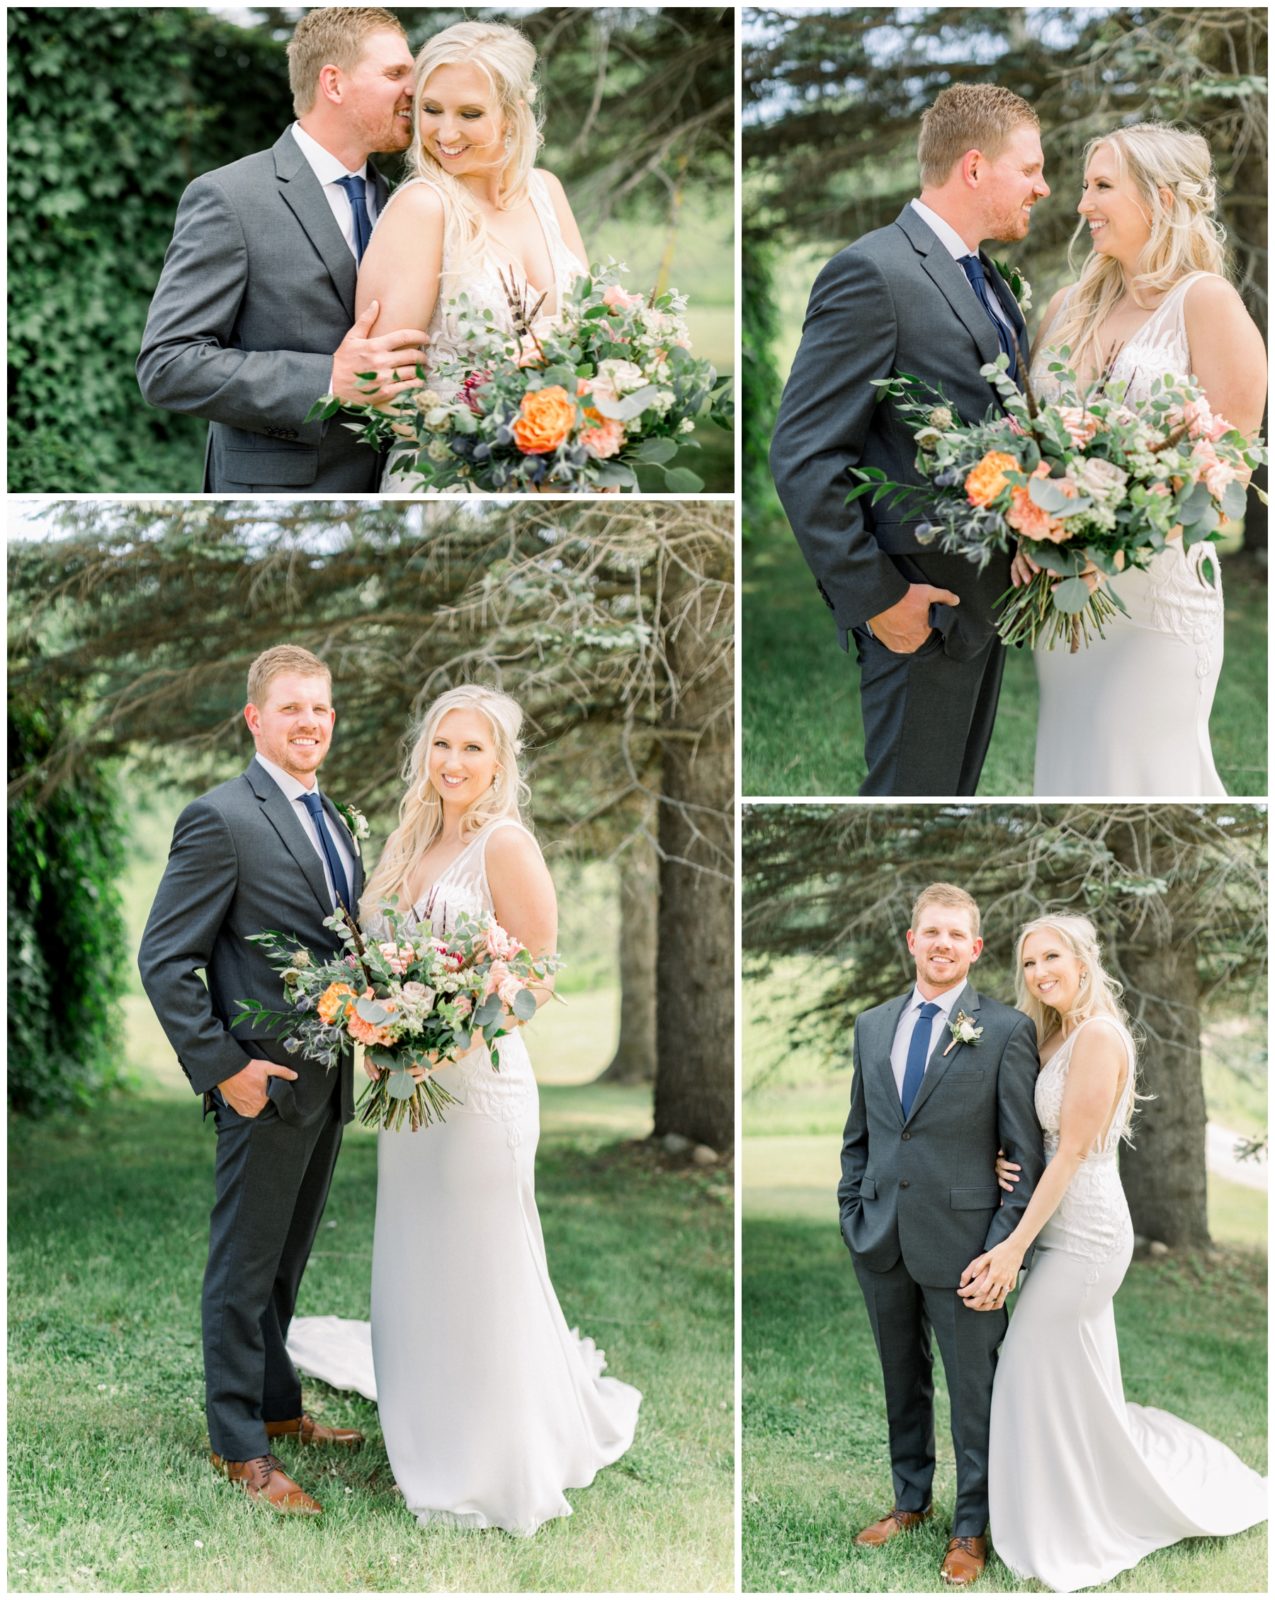 Bride and groom portraits at The Barn at Stoney Hills Wedding Venue